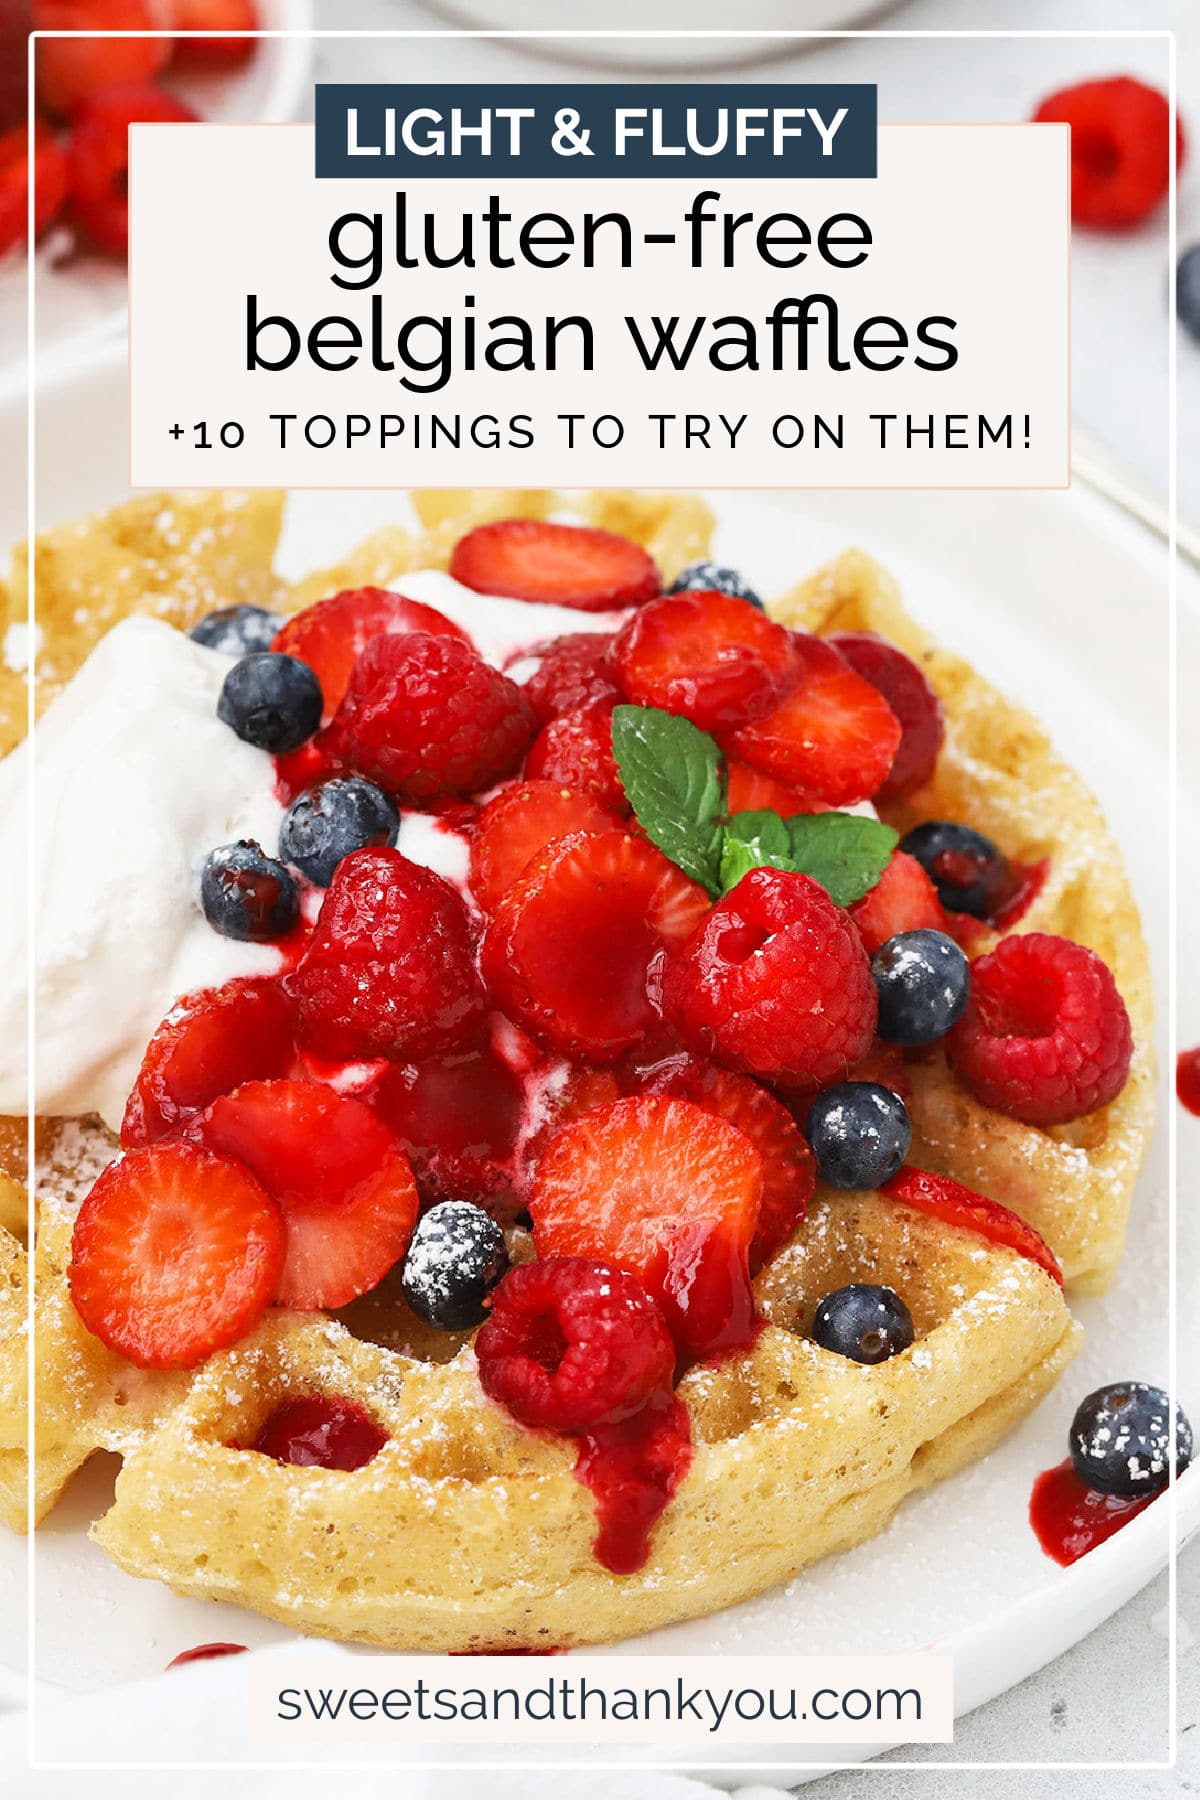 Gluten-Free Belgian Waffles - These fluffy gluten-free waffles are your new breakfast fave. Don't miss all our favorite toppings to try! // Gluten-free Belgian waffle recipe // thick gluten-free waffles // the best Gluten-free waffles // easy gluten-free waffles // how to make gluten-free Belgian waffles //